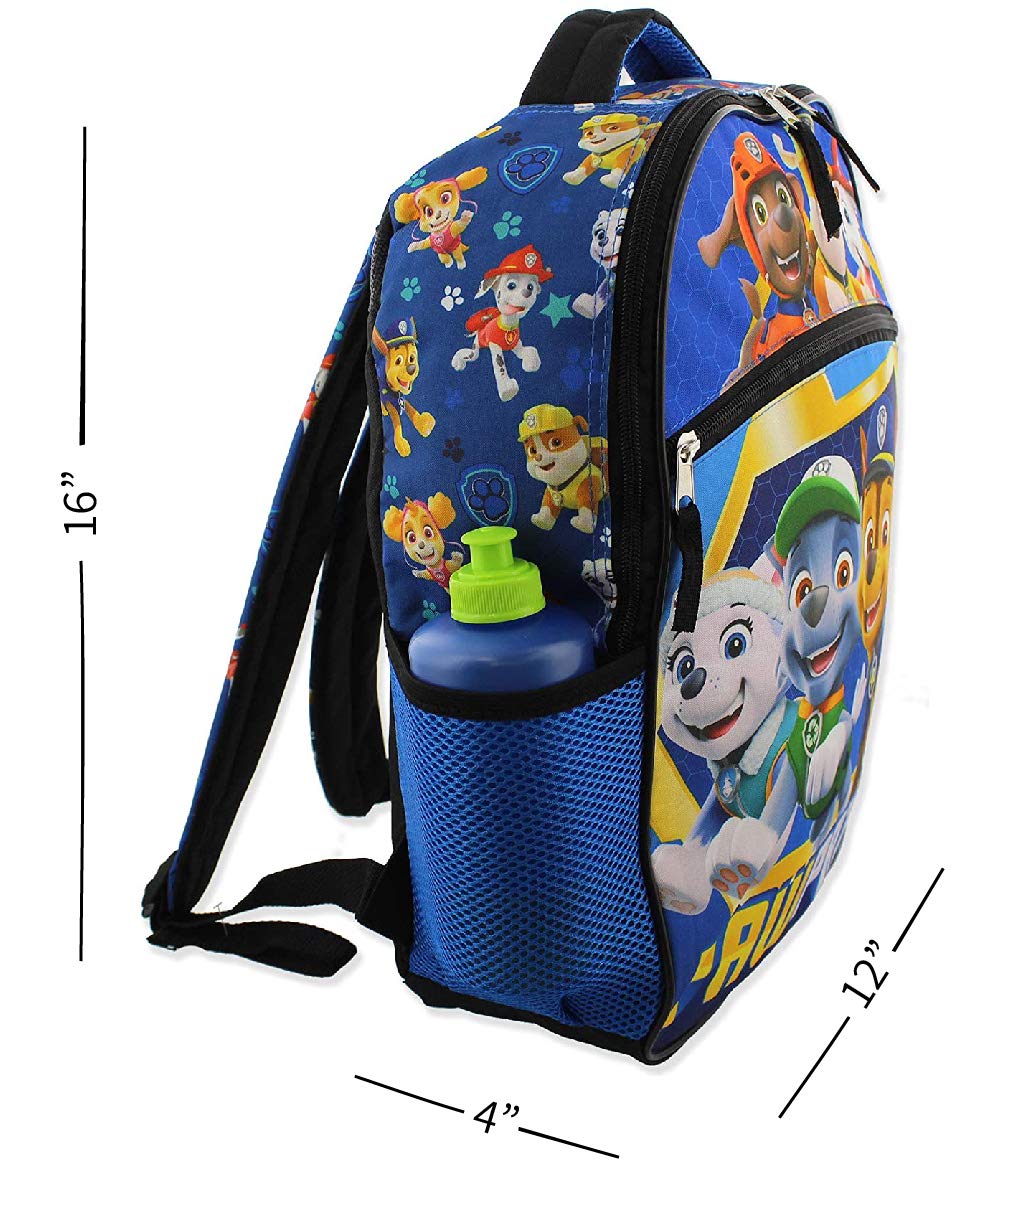 Nickelodeon Paw Patrol Pups Boy's 16 Inch School Backpack (One Size, Blue)